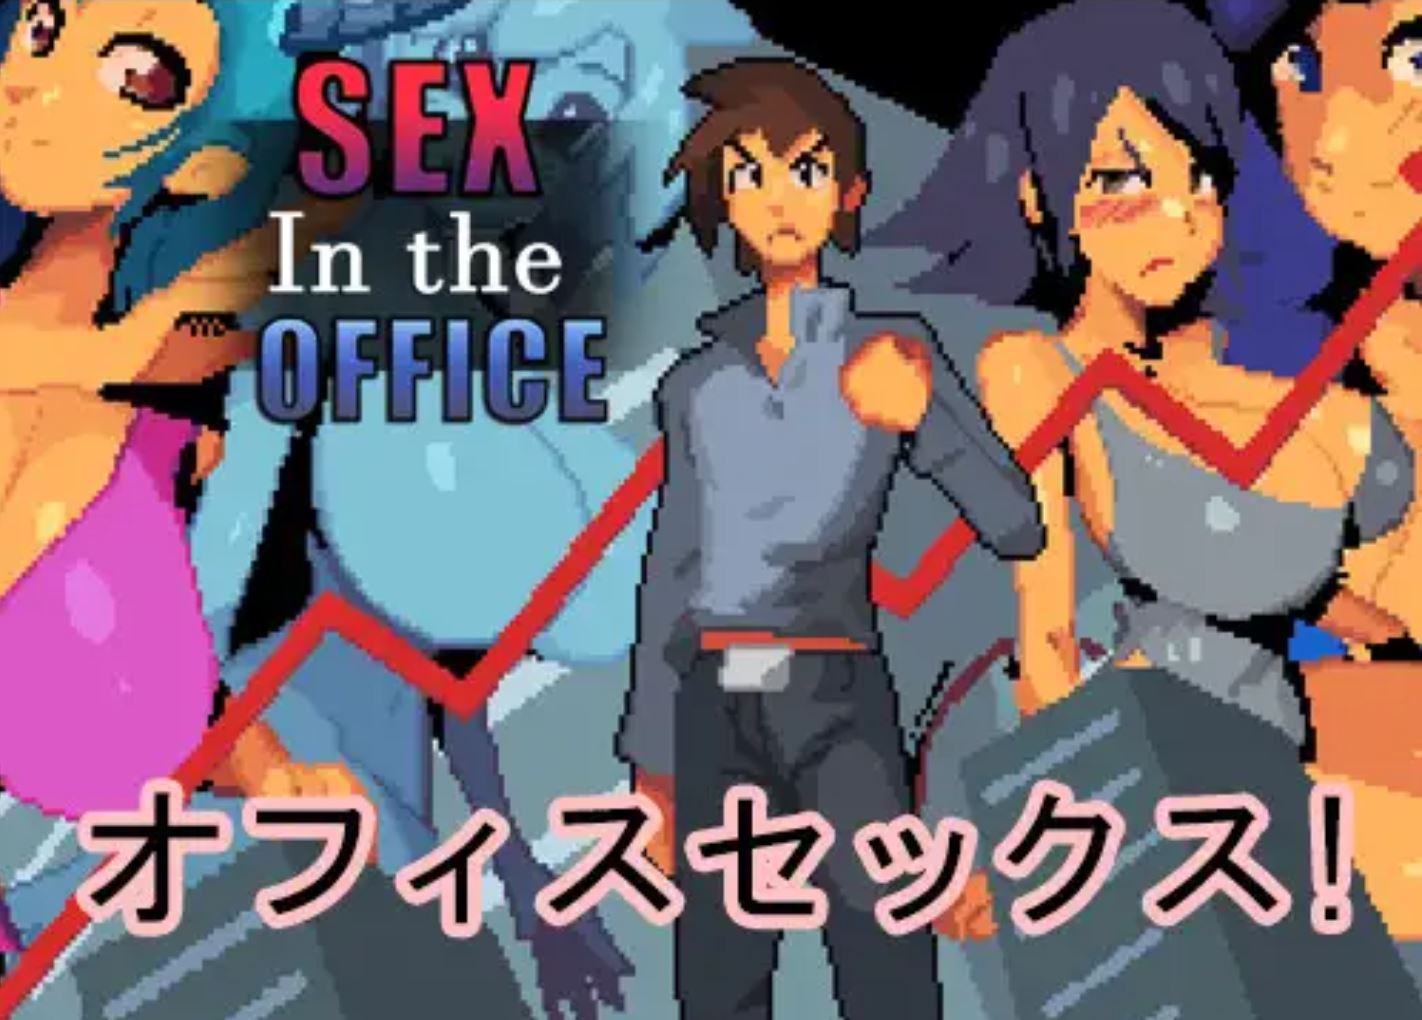 Secretary Sex Games - Sex in the Office Others Porn Sex Game v.Final Download for Windows